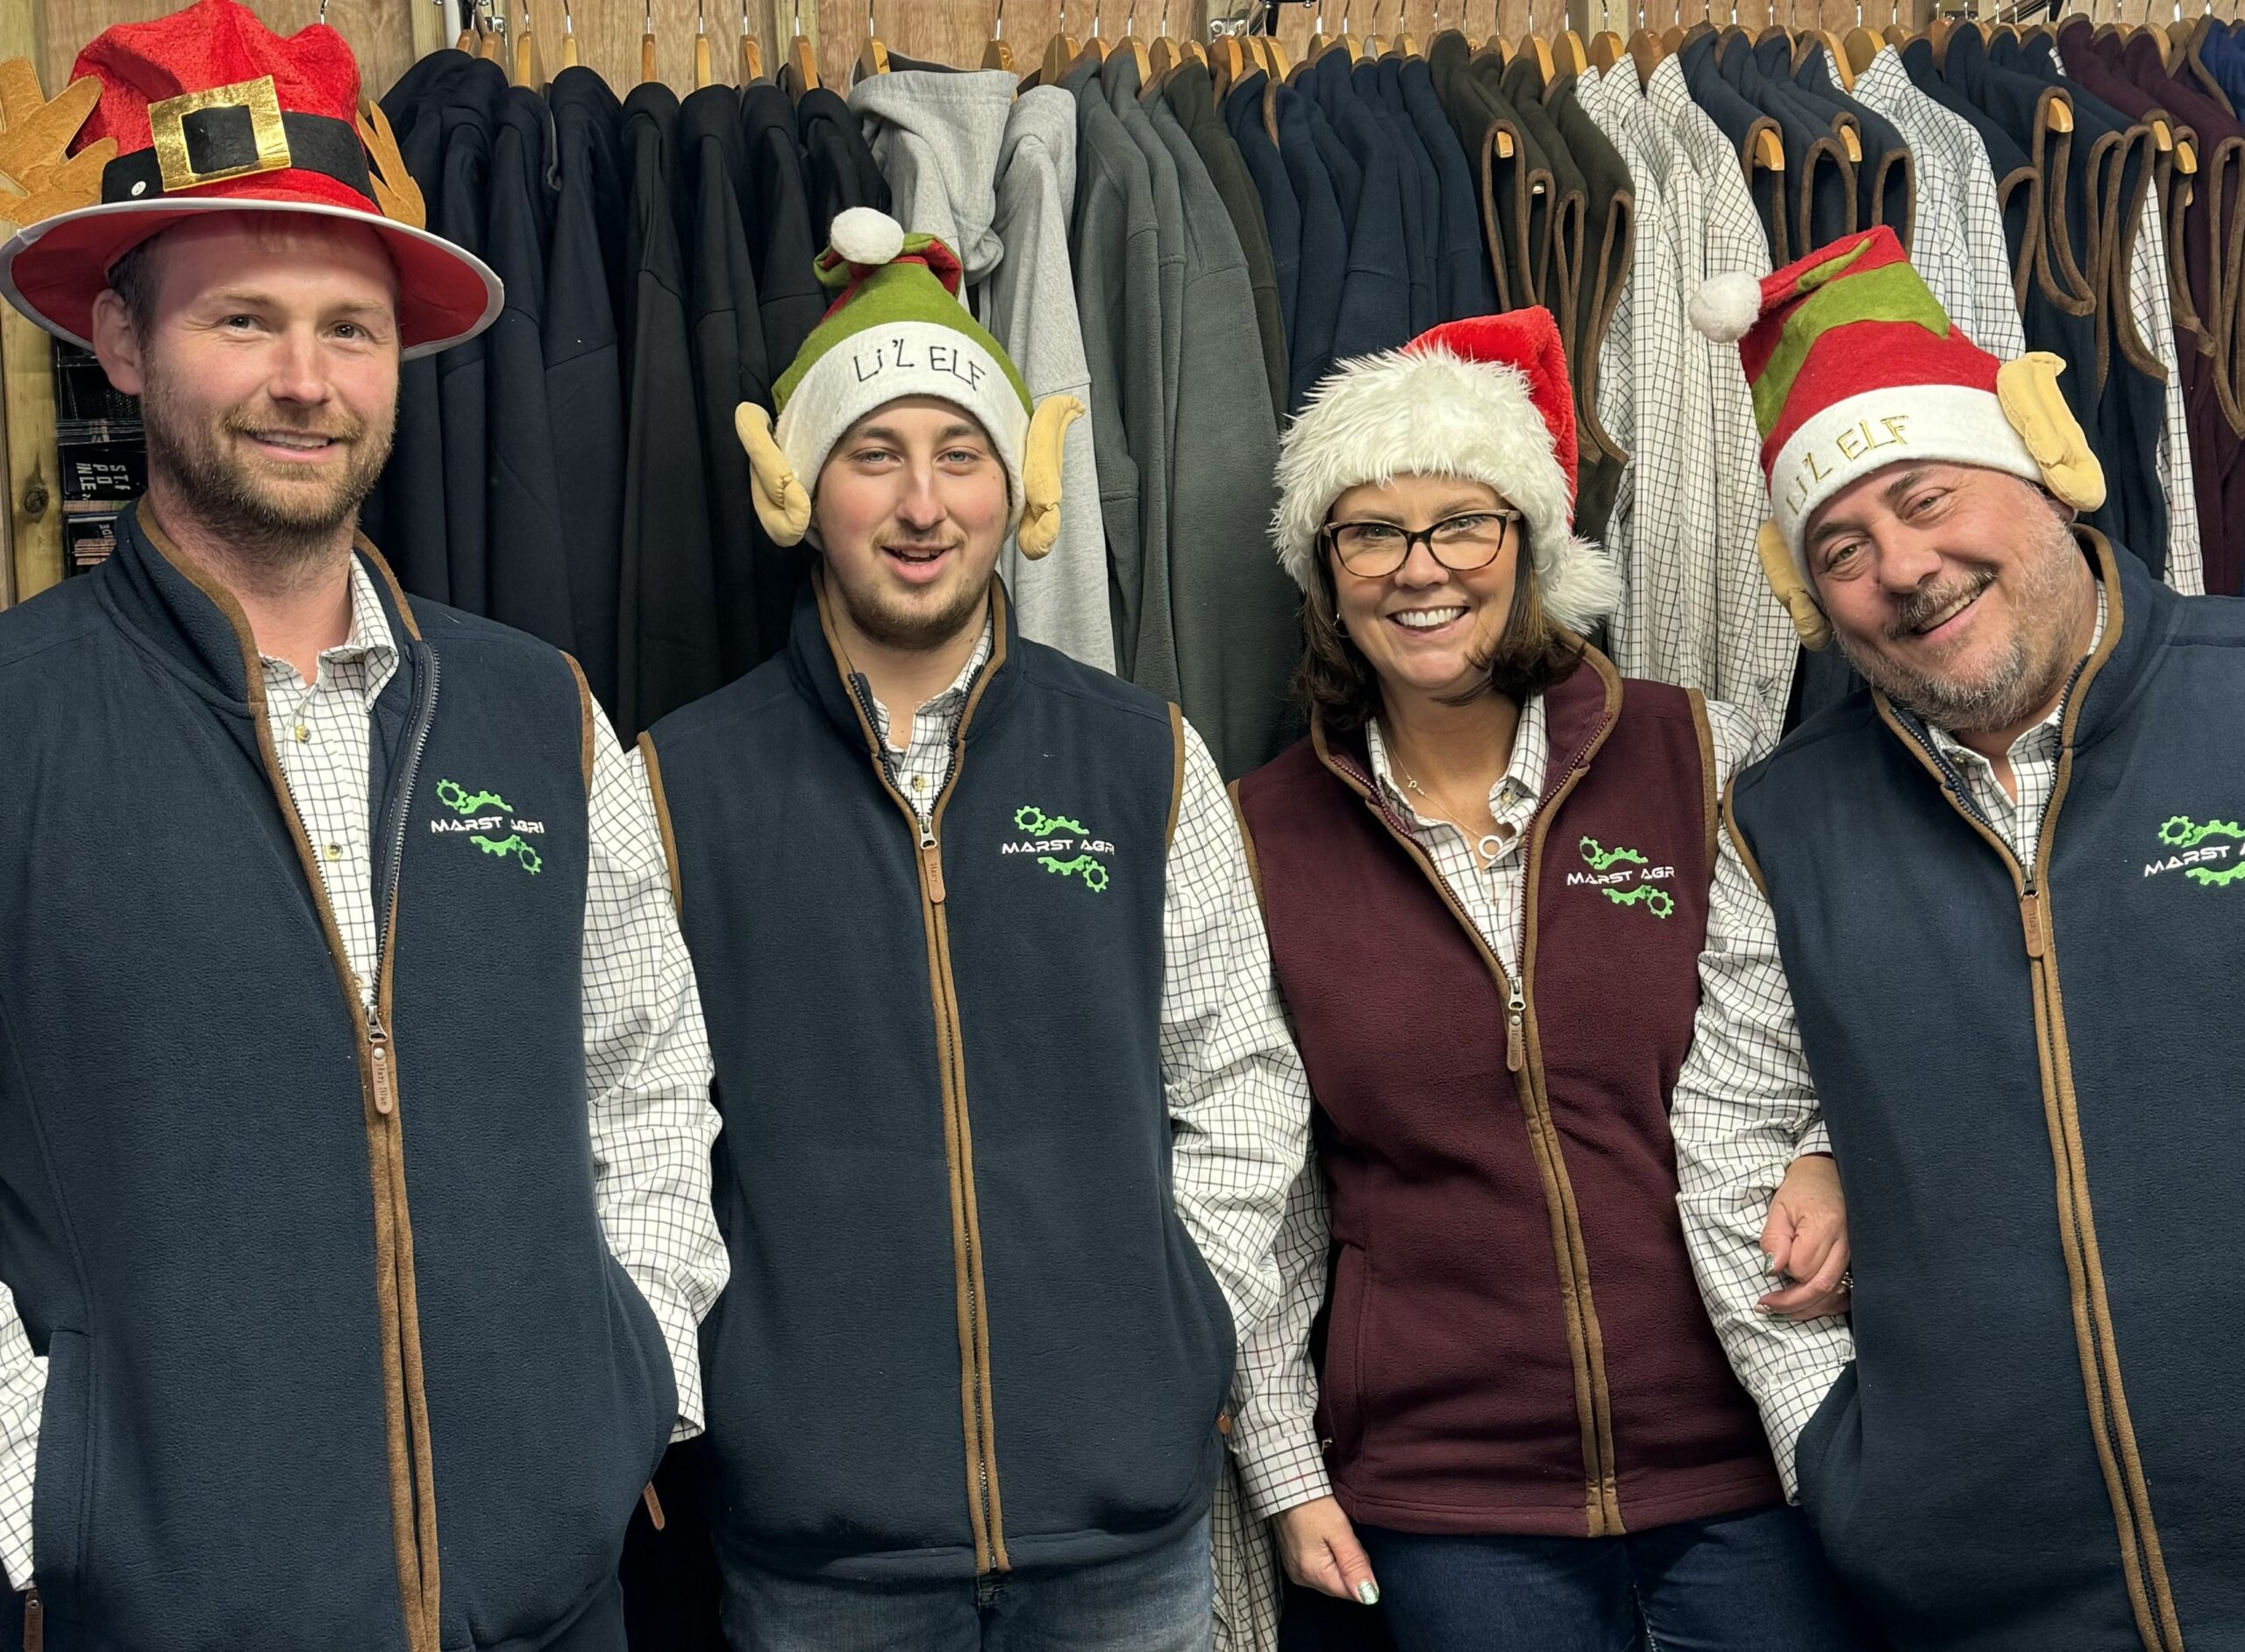 The Marst Agri team in their Christmas hats